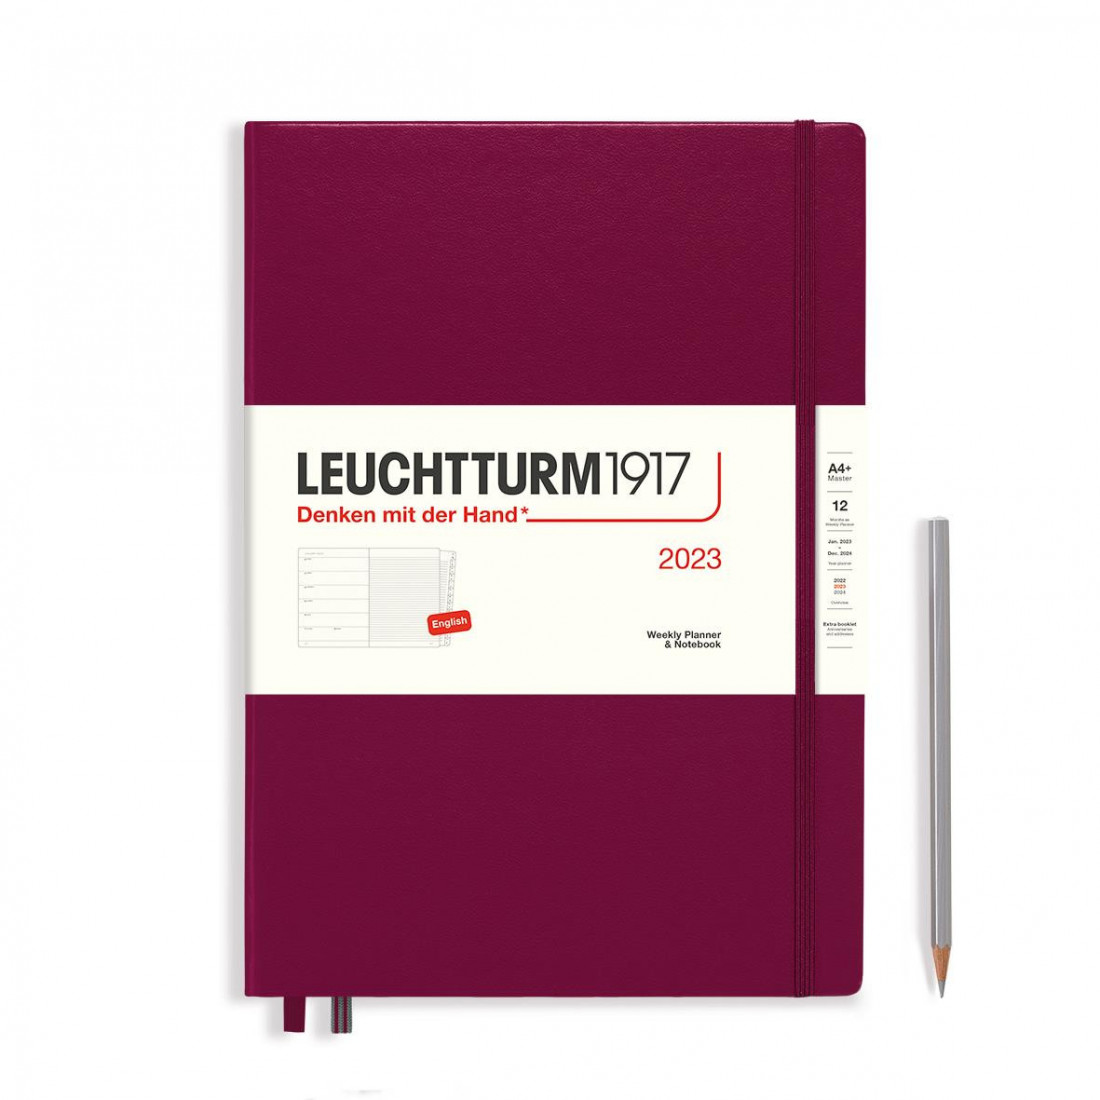 Leuchtturm 1917 Weekly Planner and Notebook 2023, port red, english A5